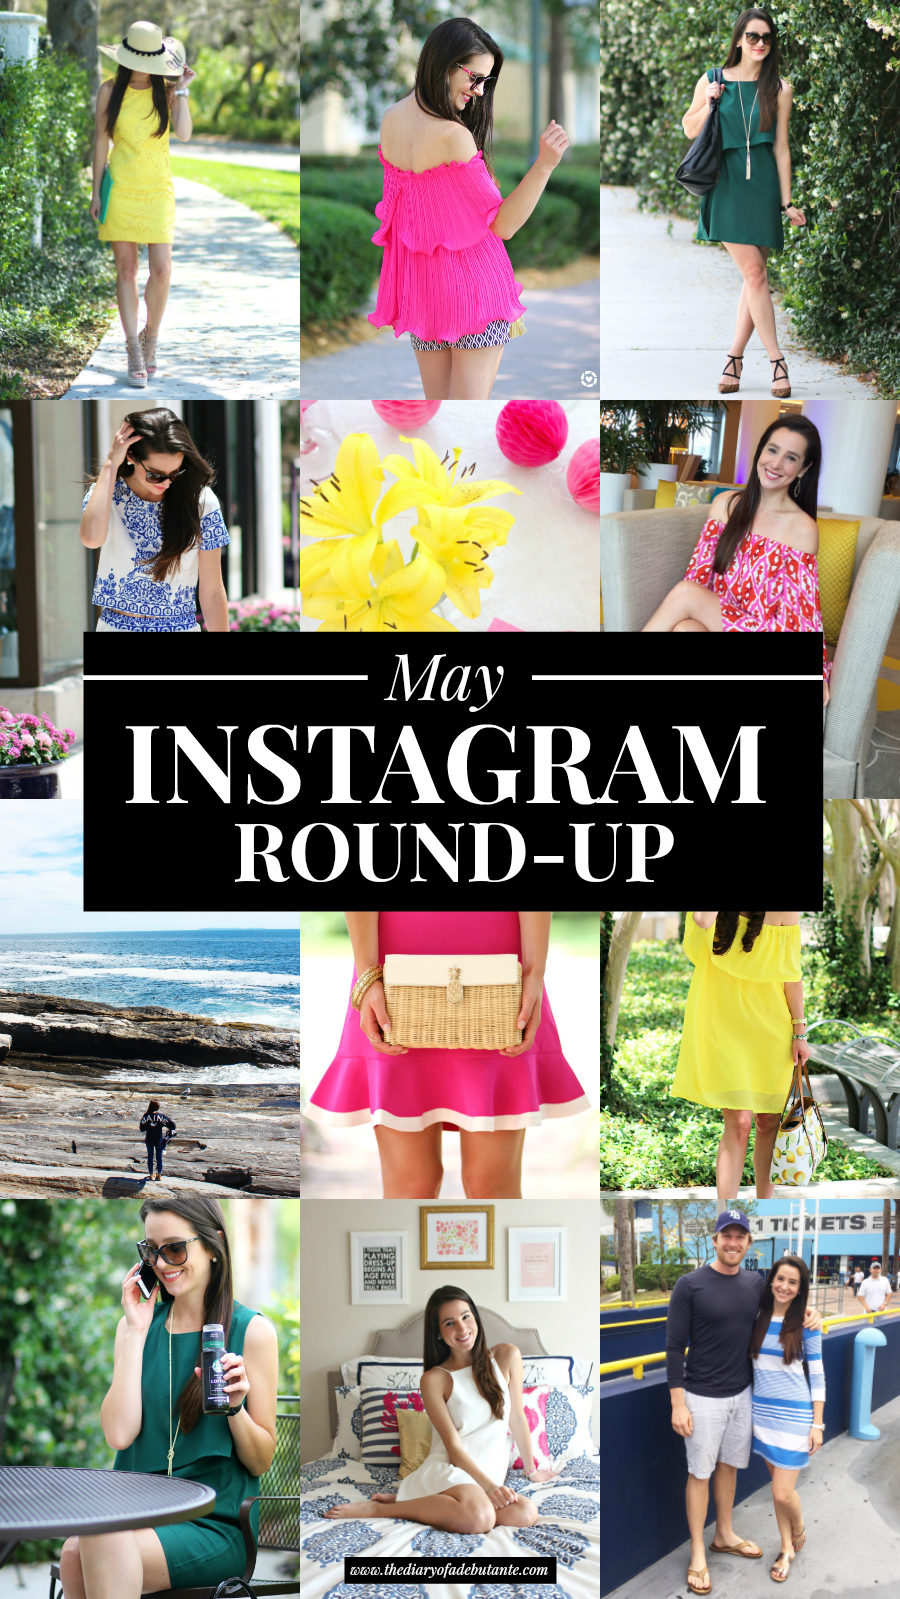 Catch Up on What You've Missed: Cute Instagram Ideas for May from Diary of a DebutanteCatch Up on What You've Missed: Cute Instagram Ideas for May from Diary of a Debutante